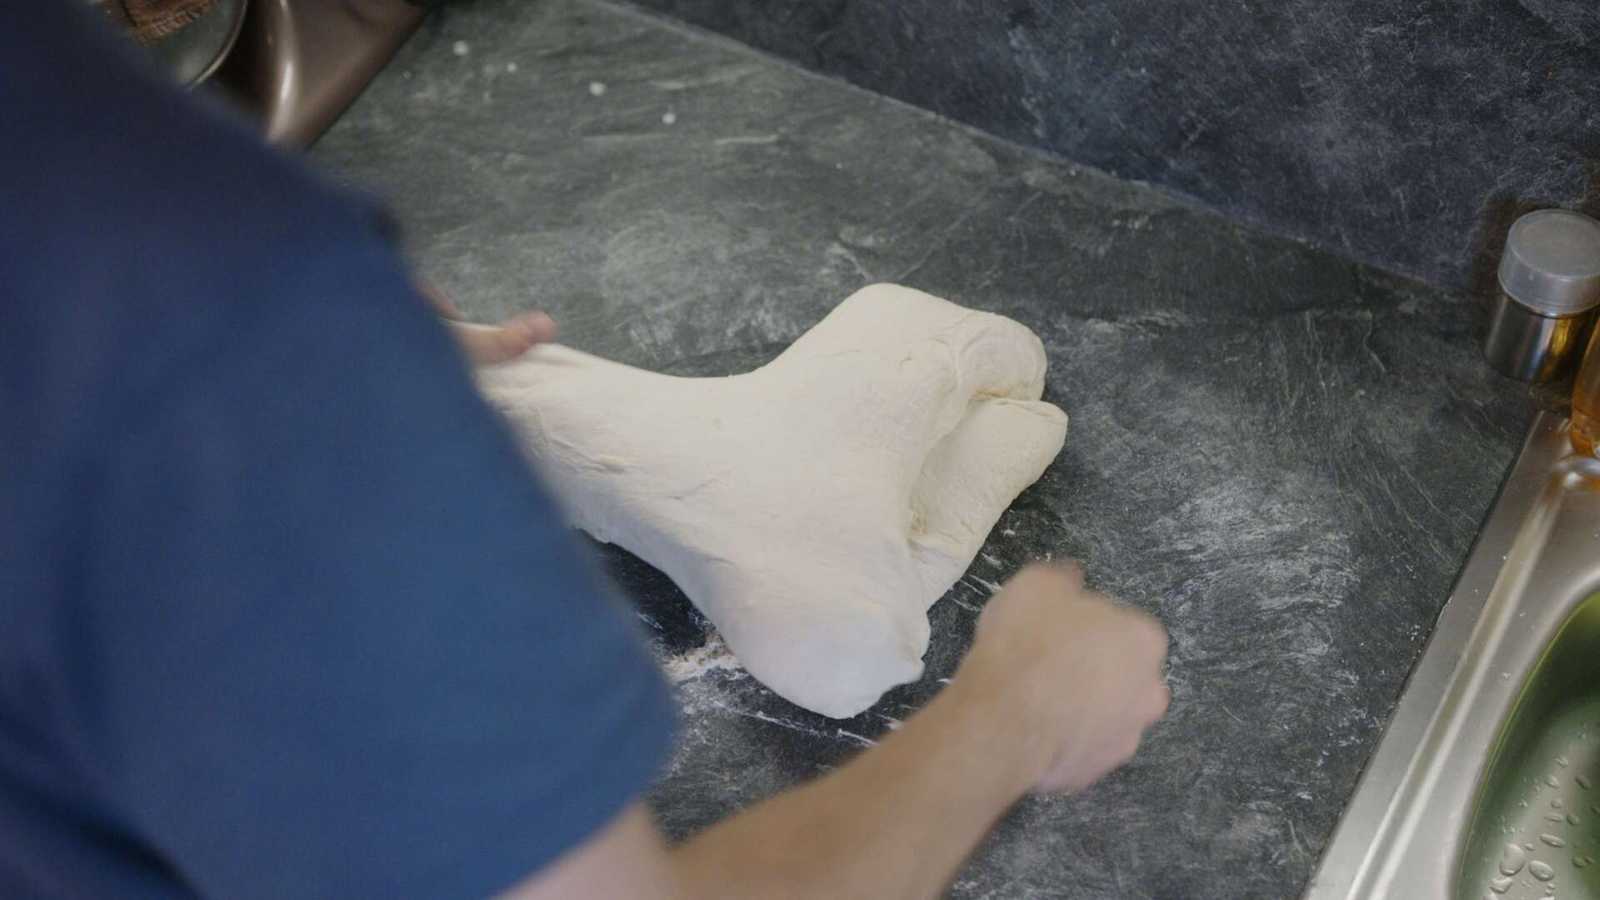 Dough being folded in the middle